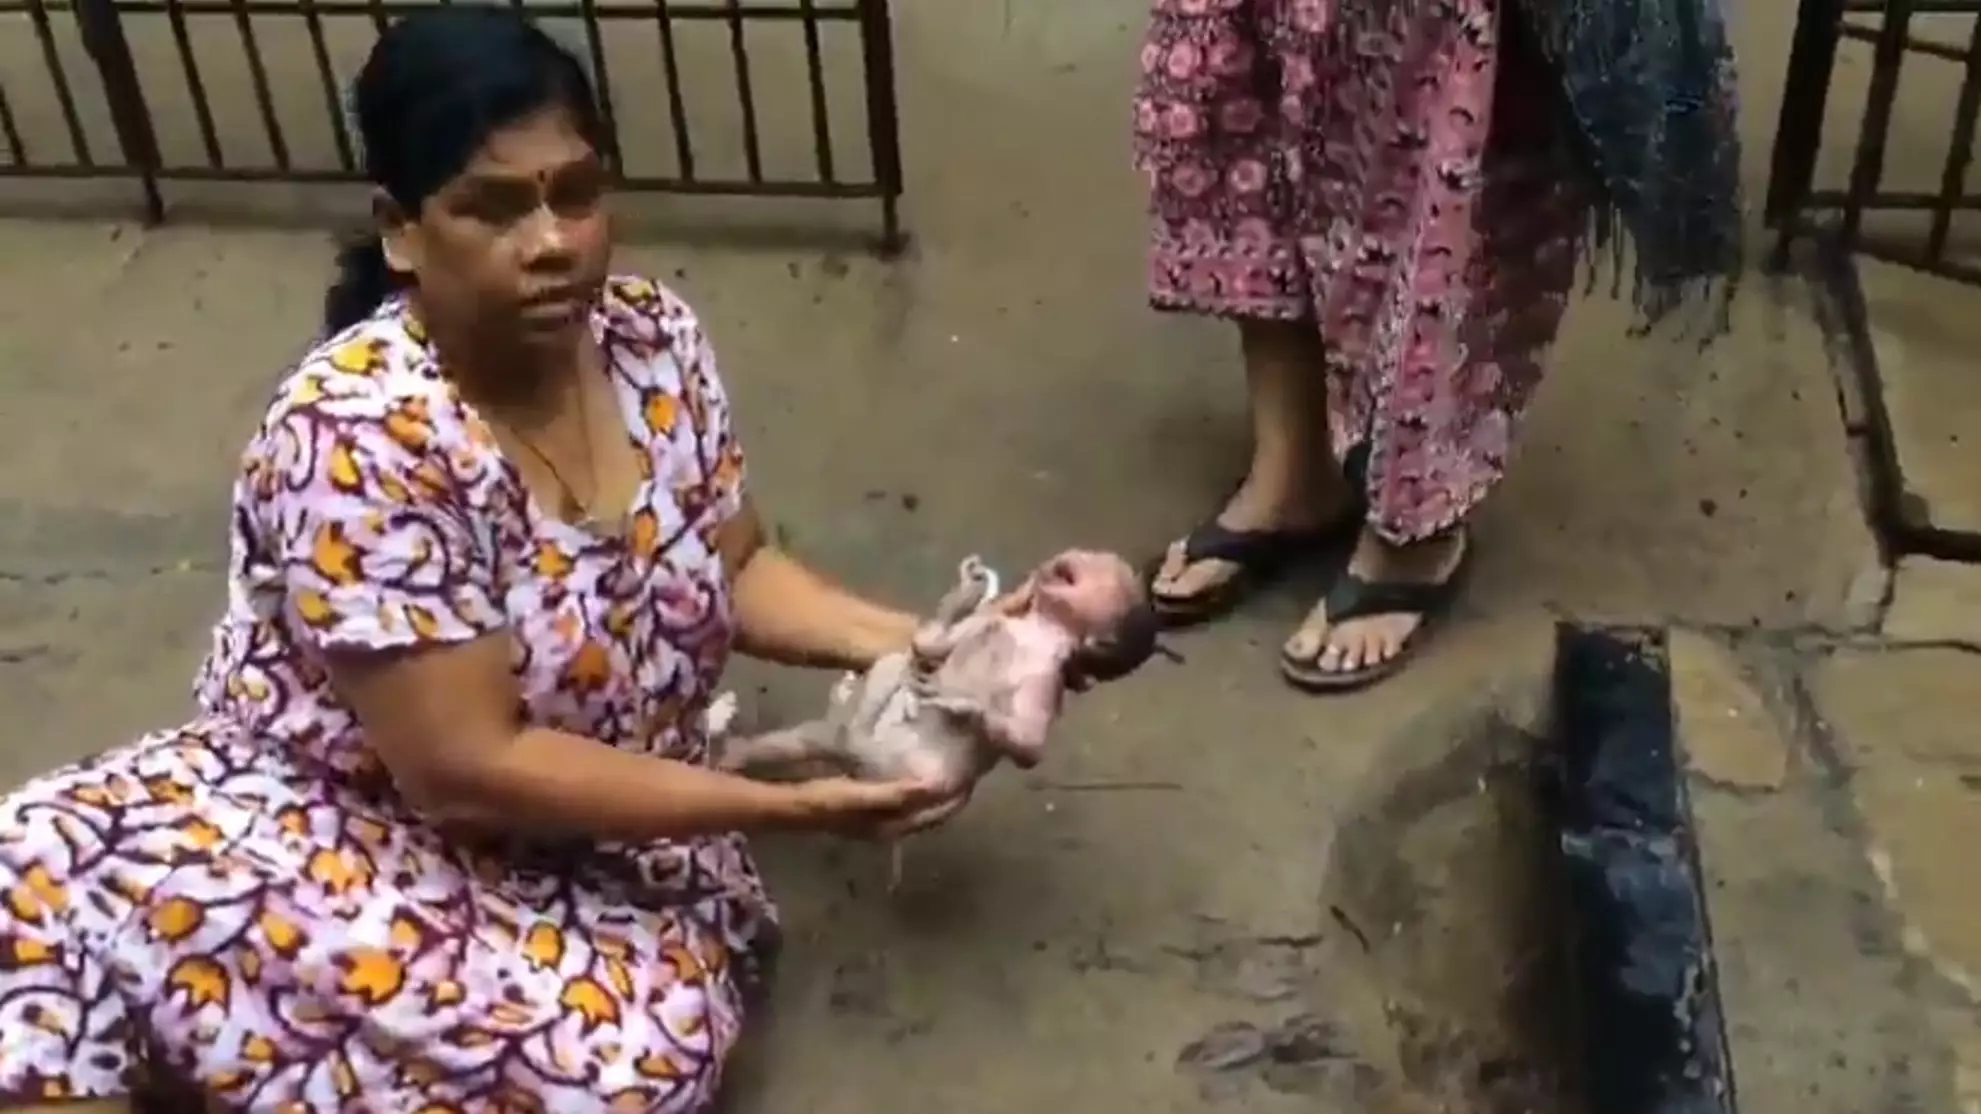 Woman Rescues Abandoned Newborn Baby From Storm Drain